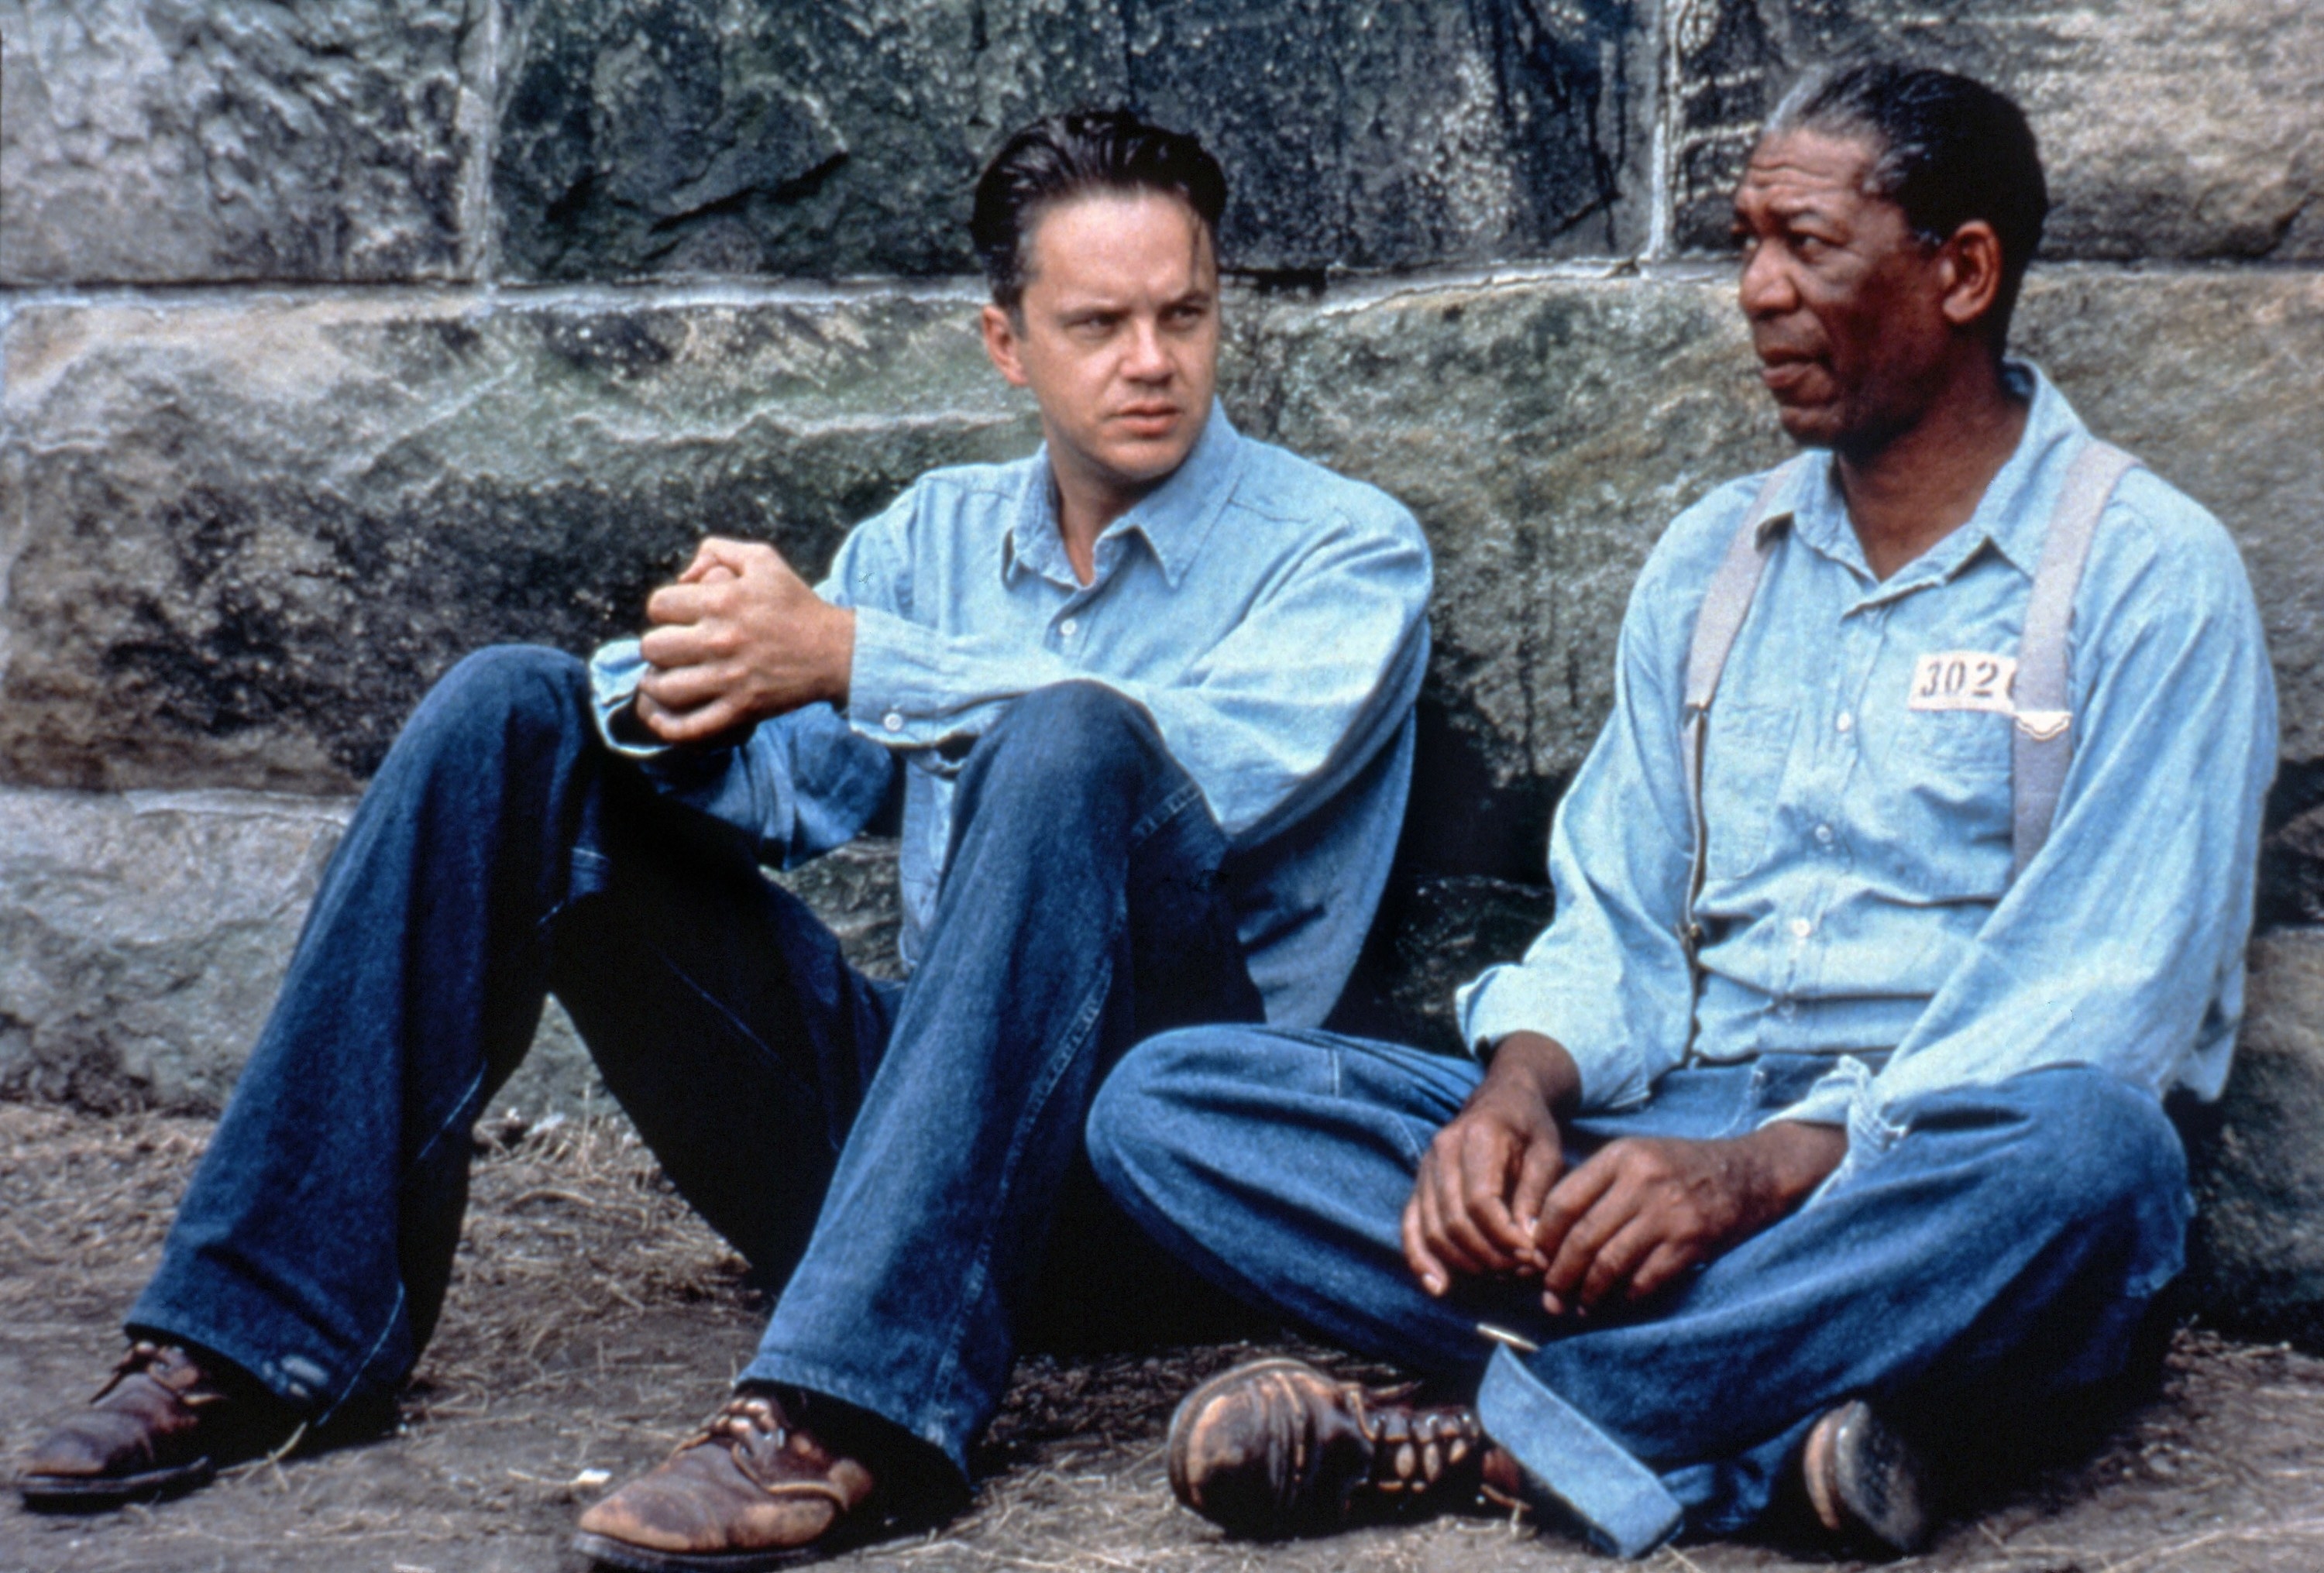 Tim Robbins and Morgan Freeman sitting on the ground and leaning against a building